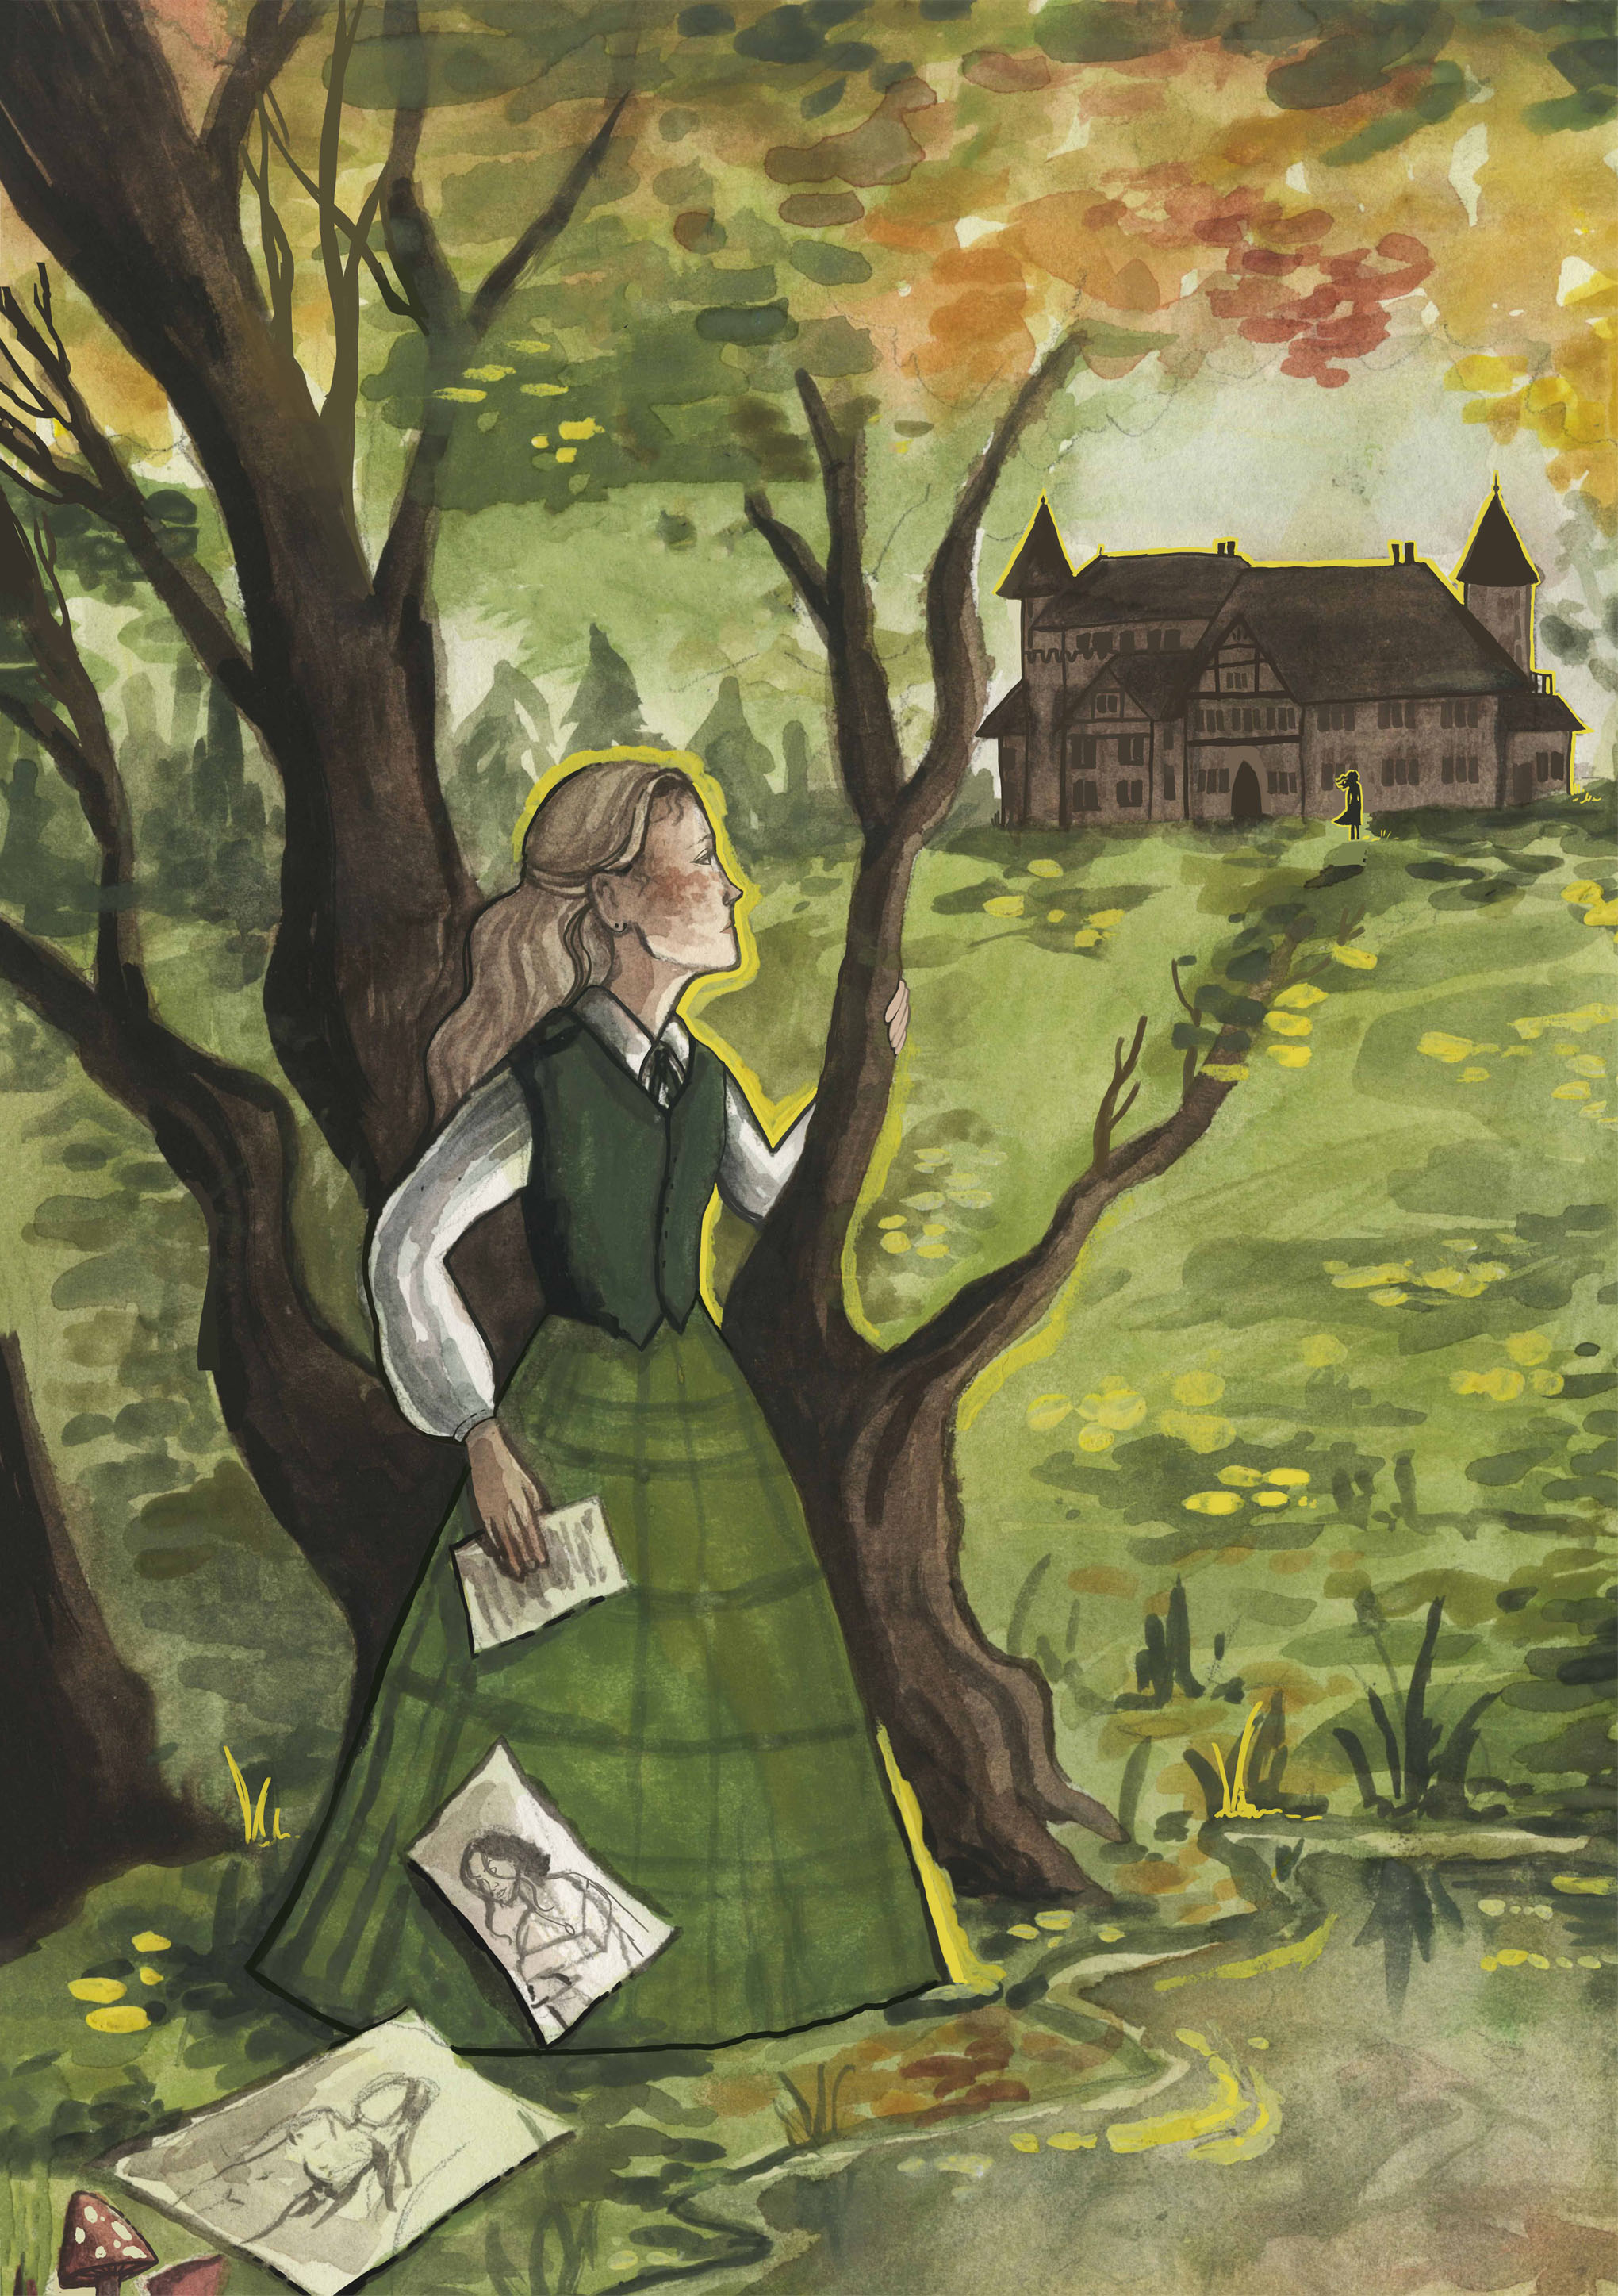 A watercolour painting of a woman, dressed in 19th century clothing, standing beside a lake looking over her shoulder at the gothic mansion behind her.